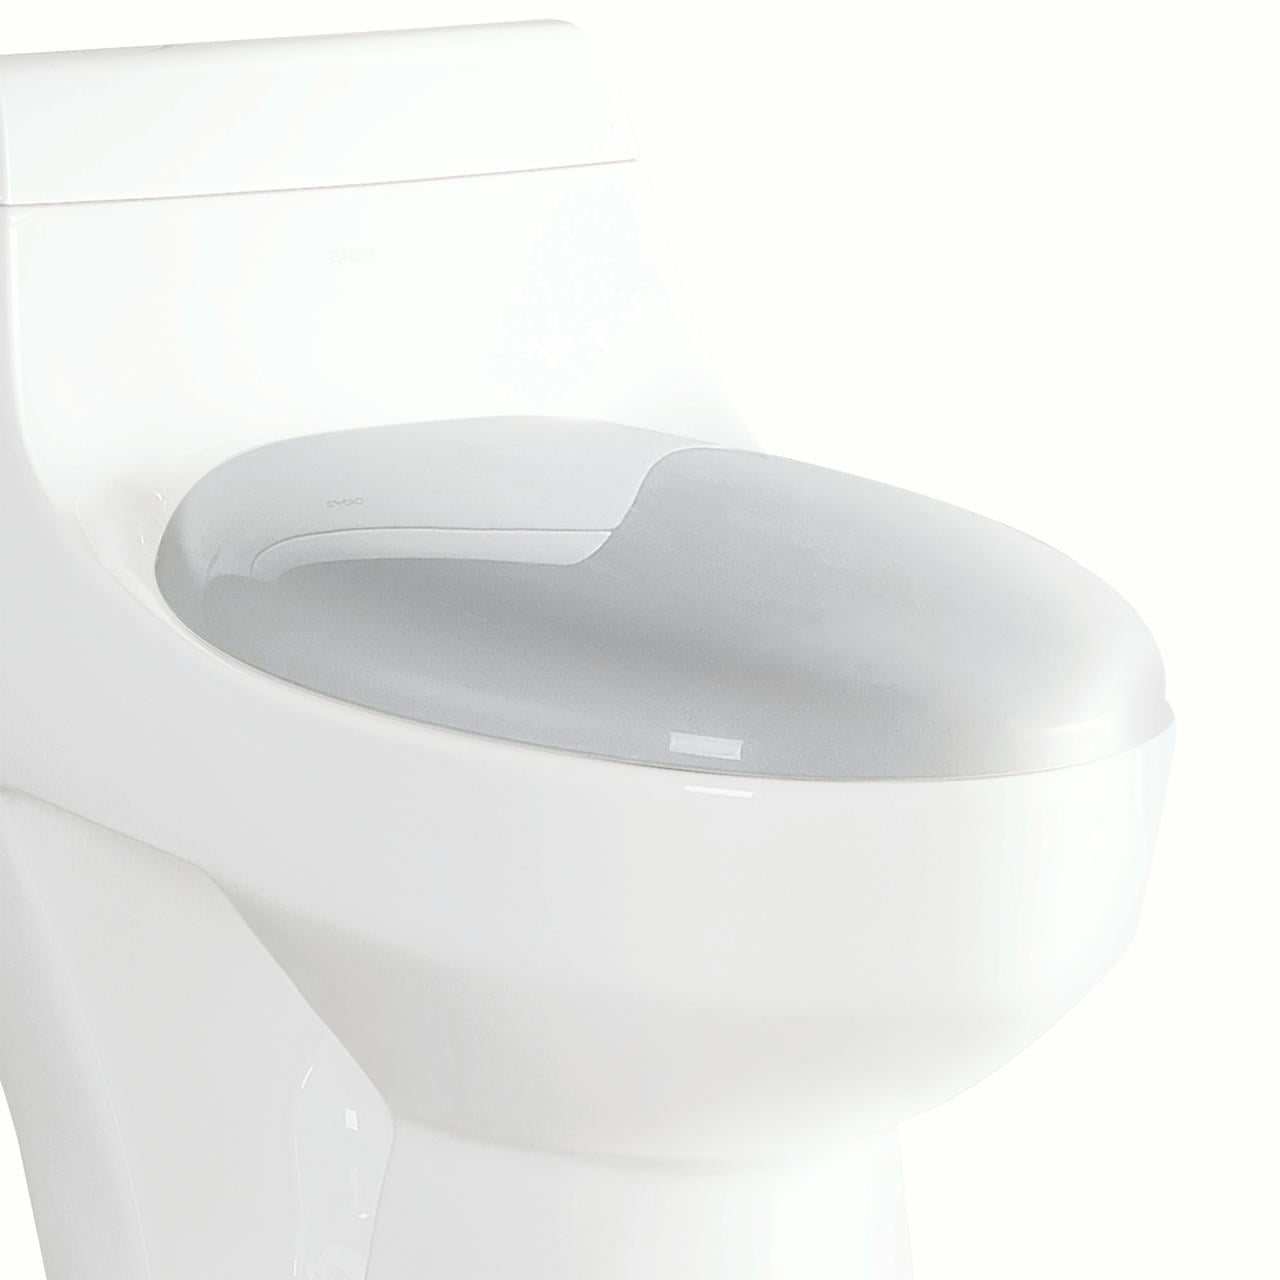 R-108seat Replacement Soft Closing Plastic Toilet Seat, White For Tb108